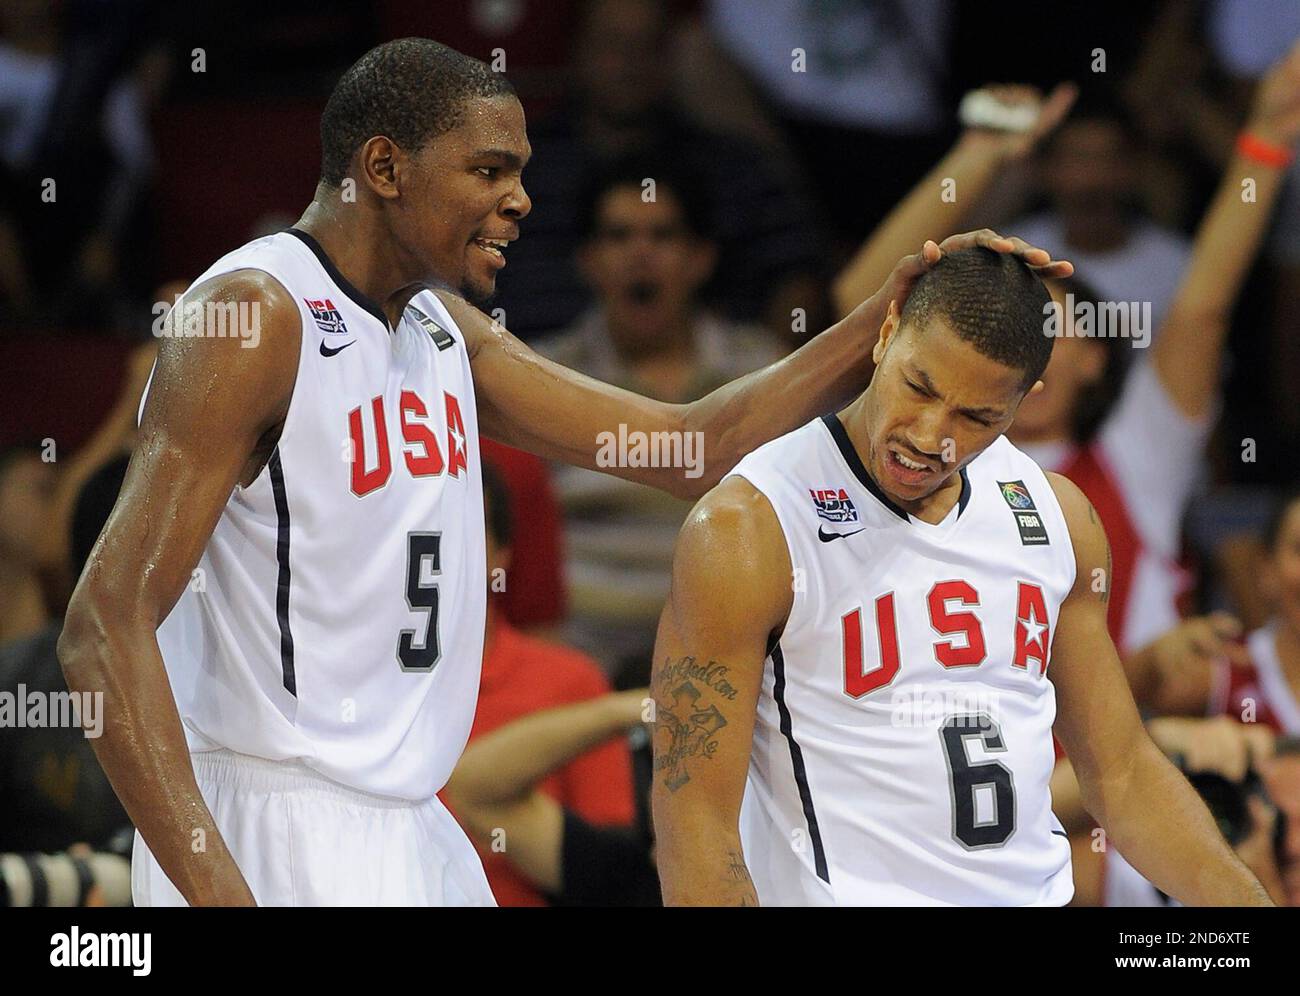 USA's Kevin Durant, left, congratulates Derrick Rose after scoring during  the preliminary round of the World Basketball Championship, Monday, Aug.  30, 2010, in Istanbul, Turkey. (AP Photo/Mark J. Terrill Stock Photo - Alamy